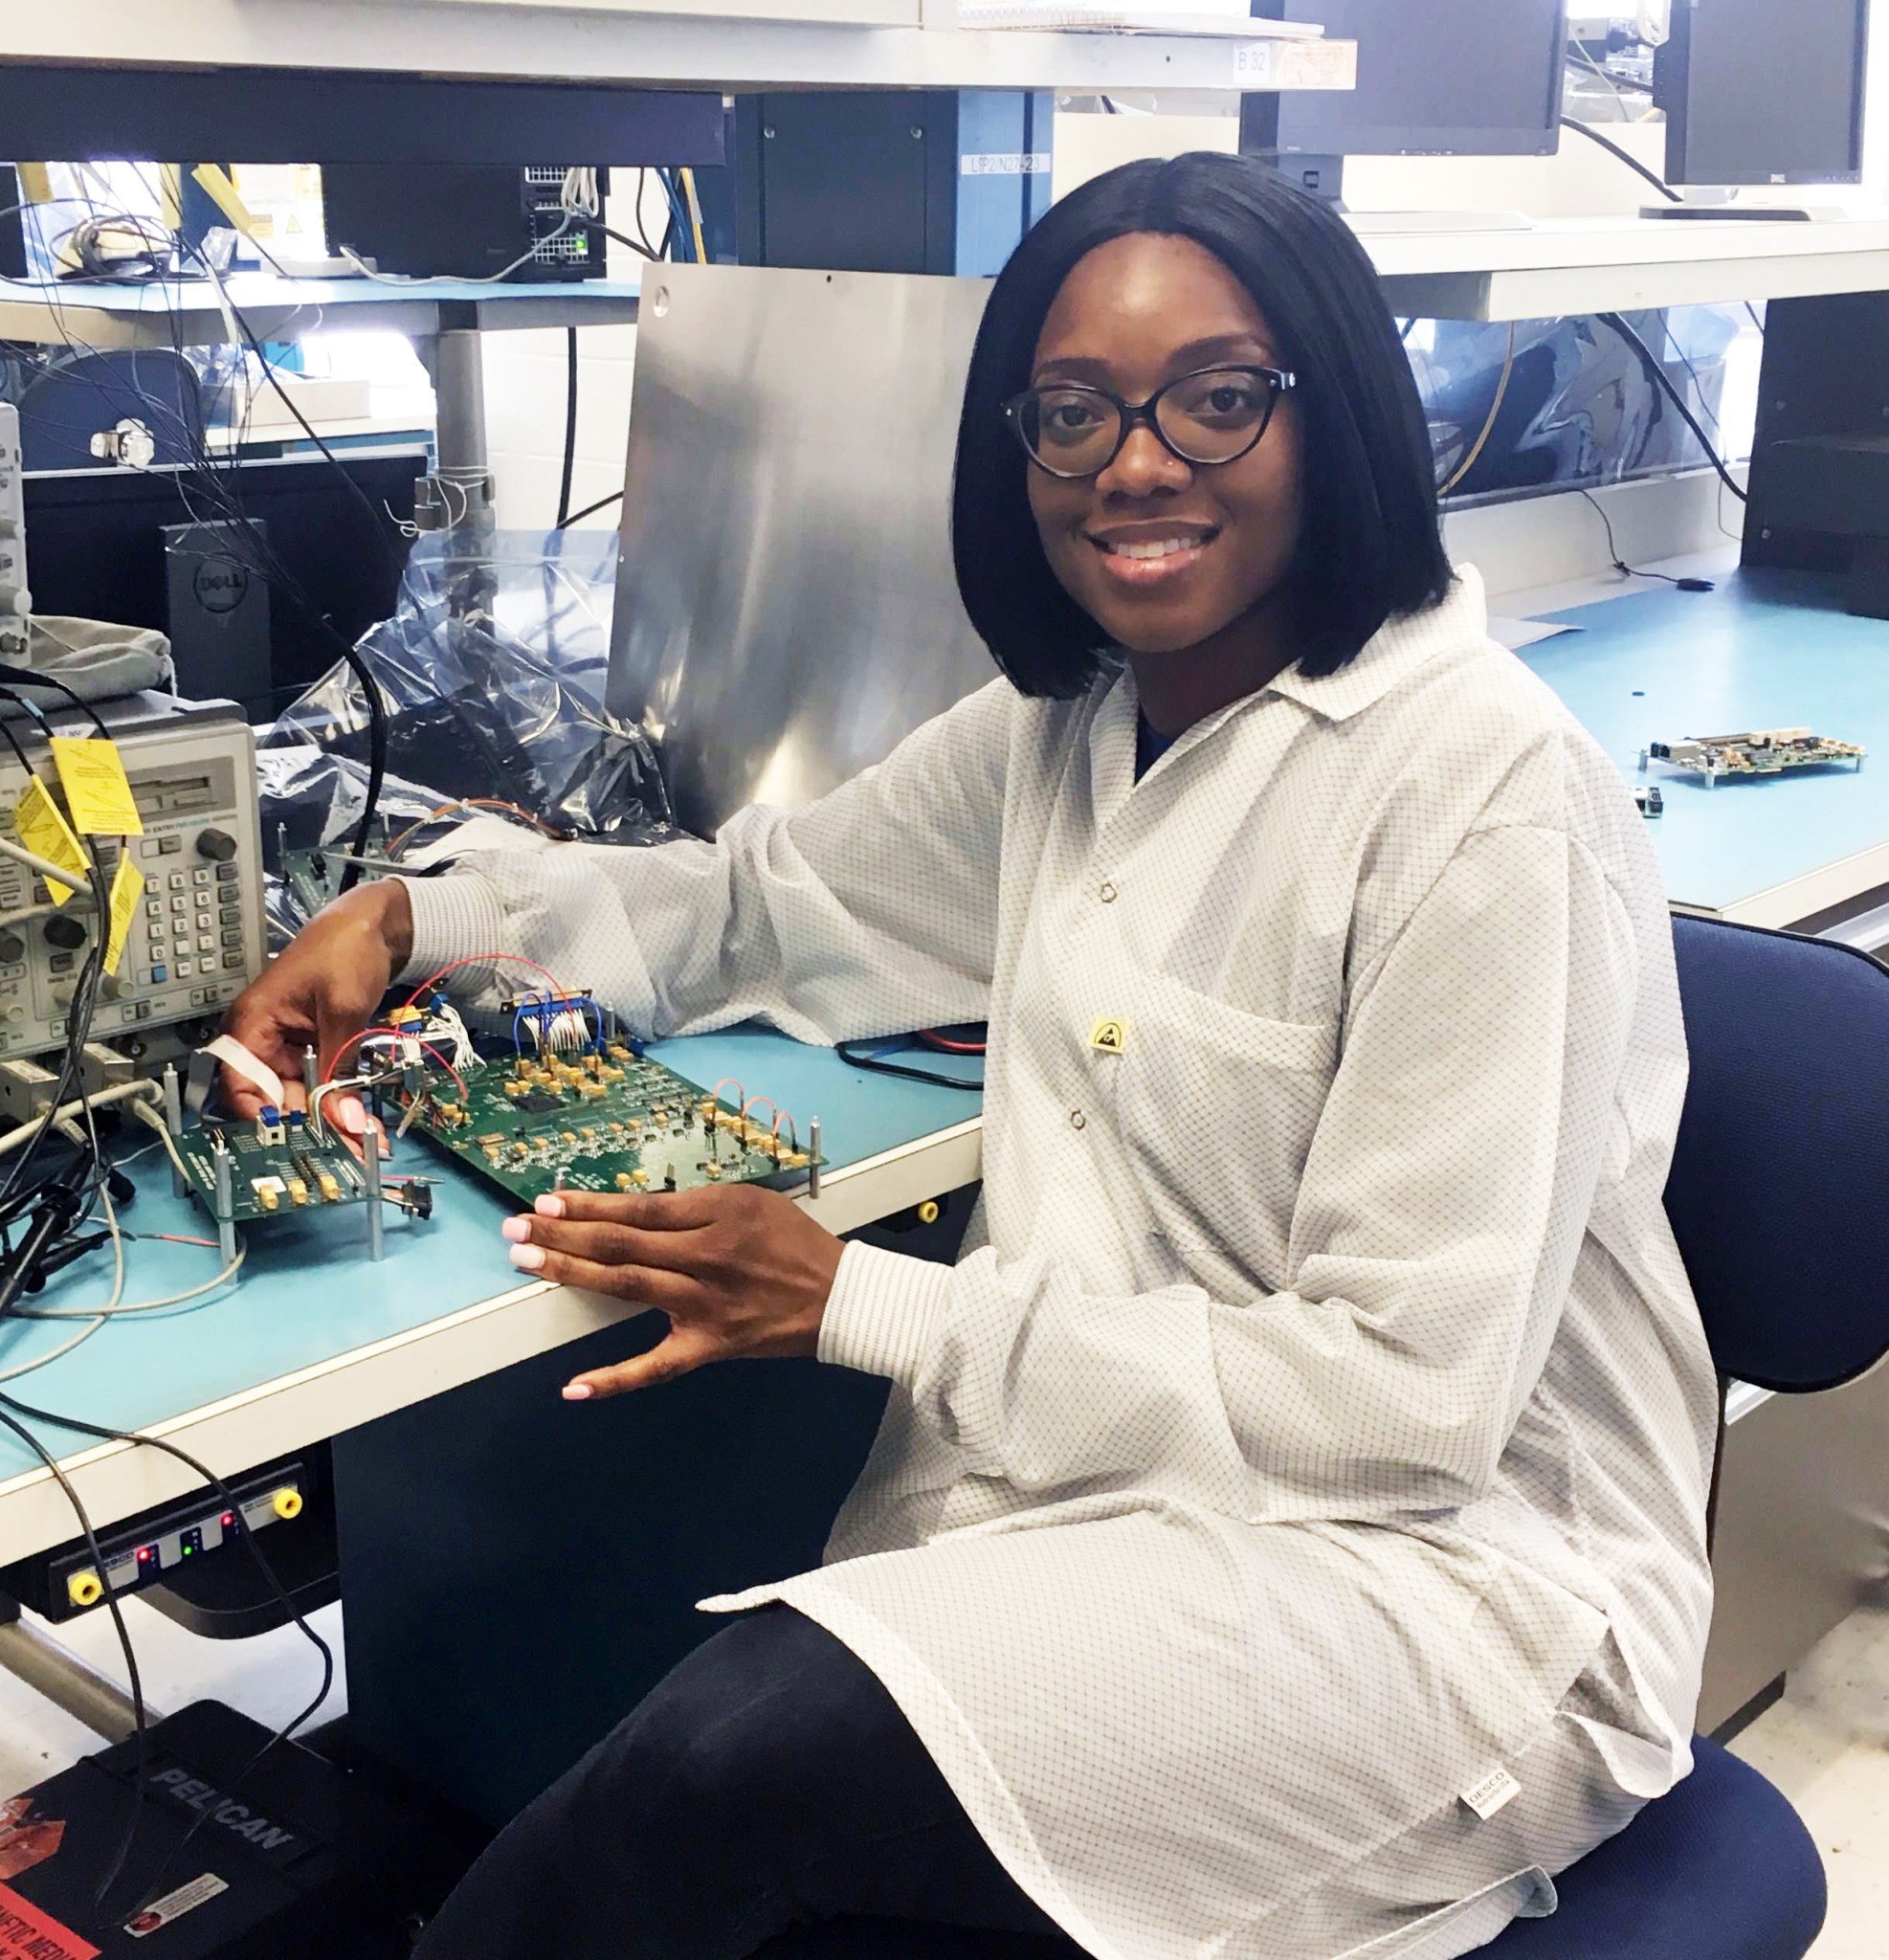 Sanetra is seated in front of a desk topped with some hardware she's been working on. She is smiling at the camera.